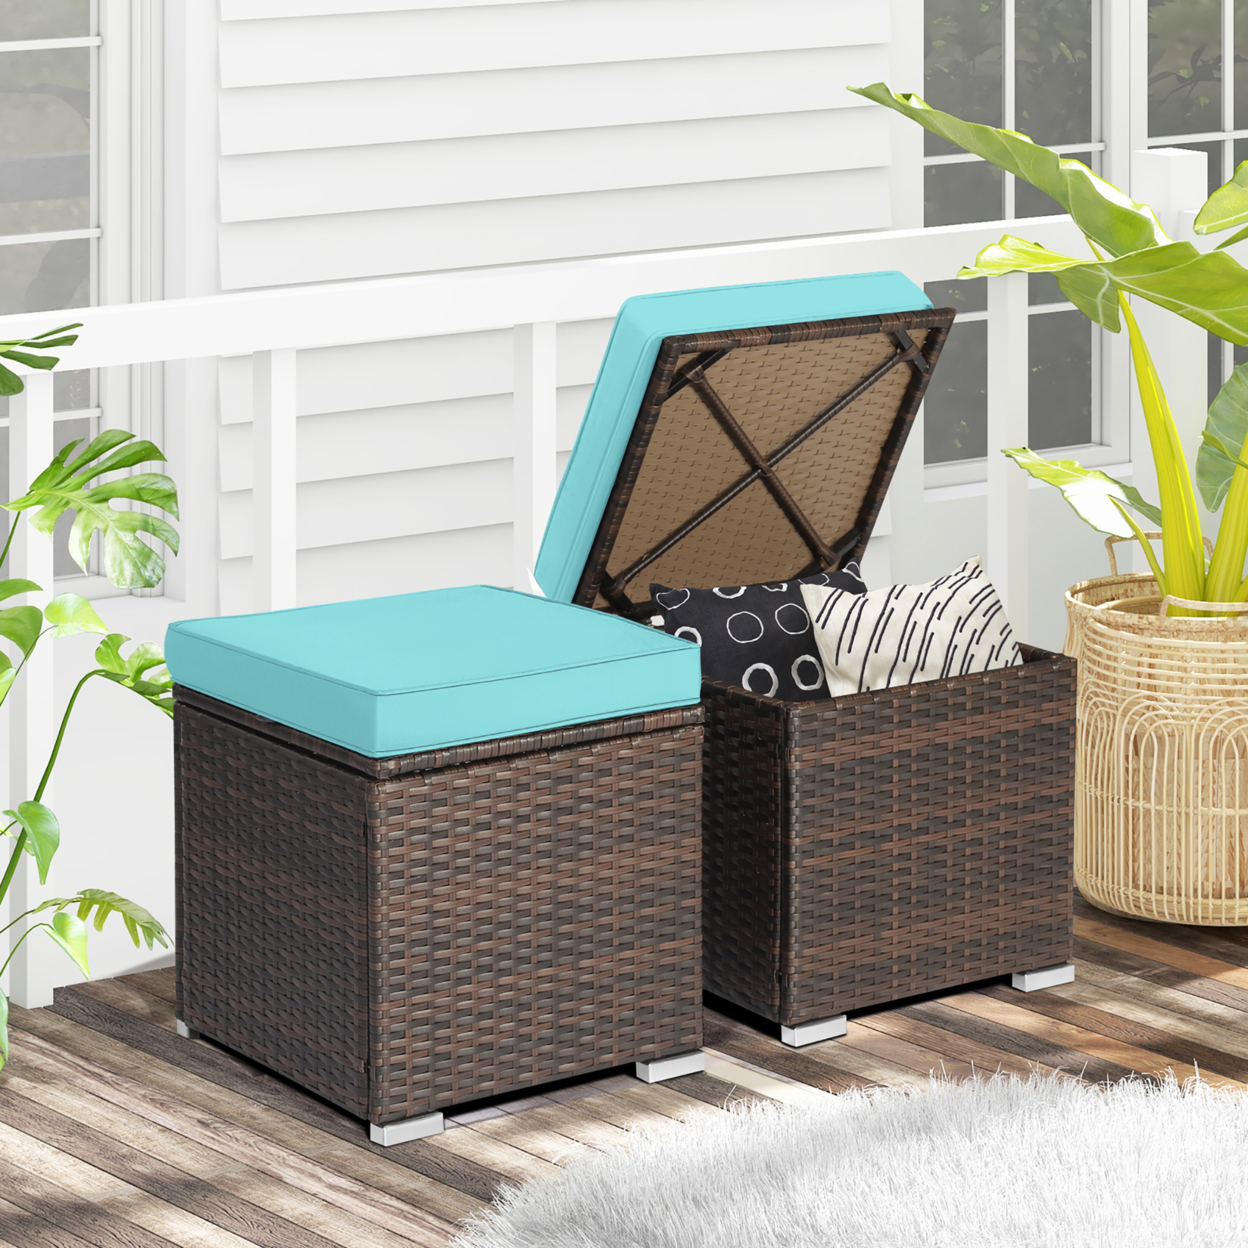 2PCS Outdoor Patio Ottomans Hand-Woven PE Wicker Footstools W/ Removable Cushions - Turquoise